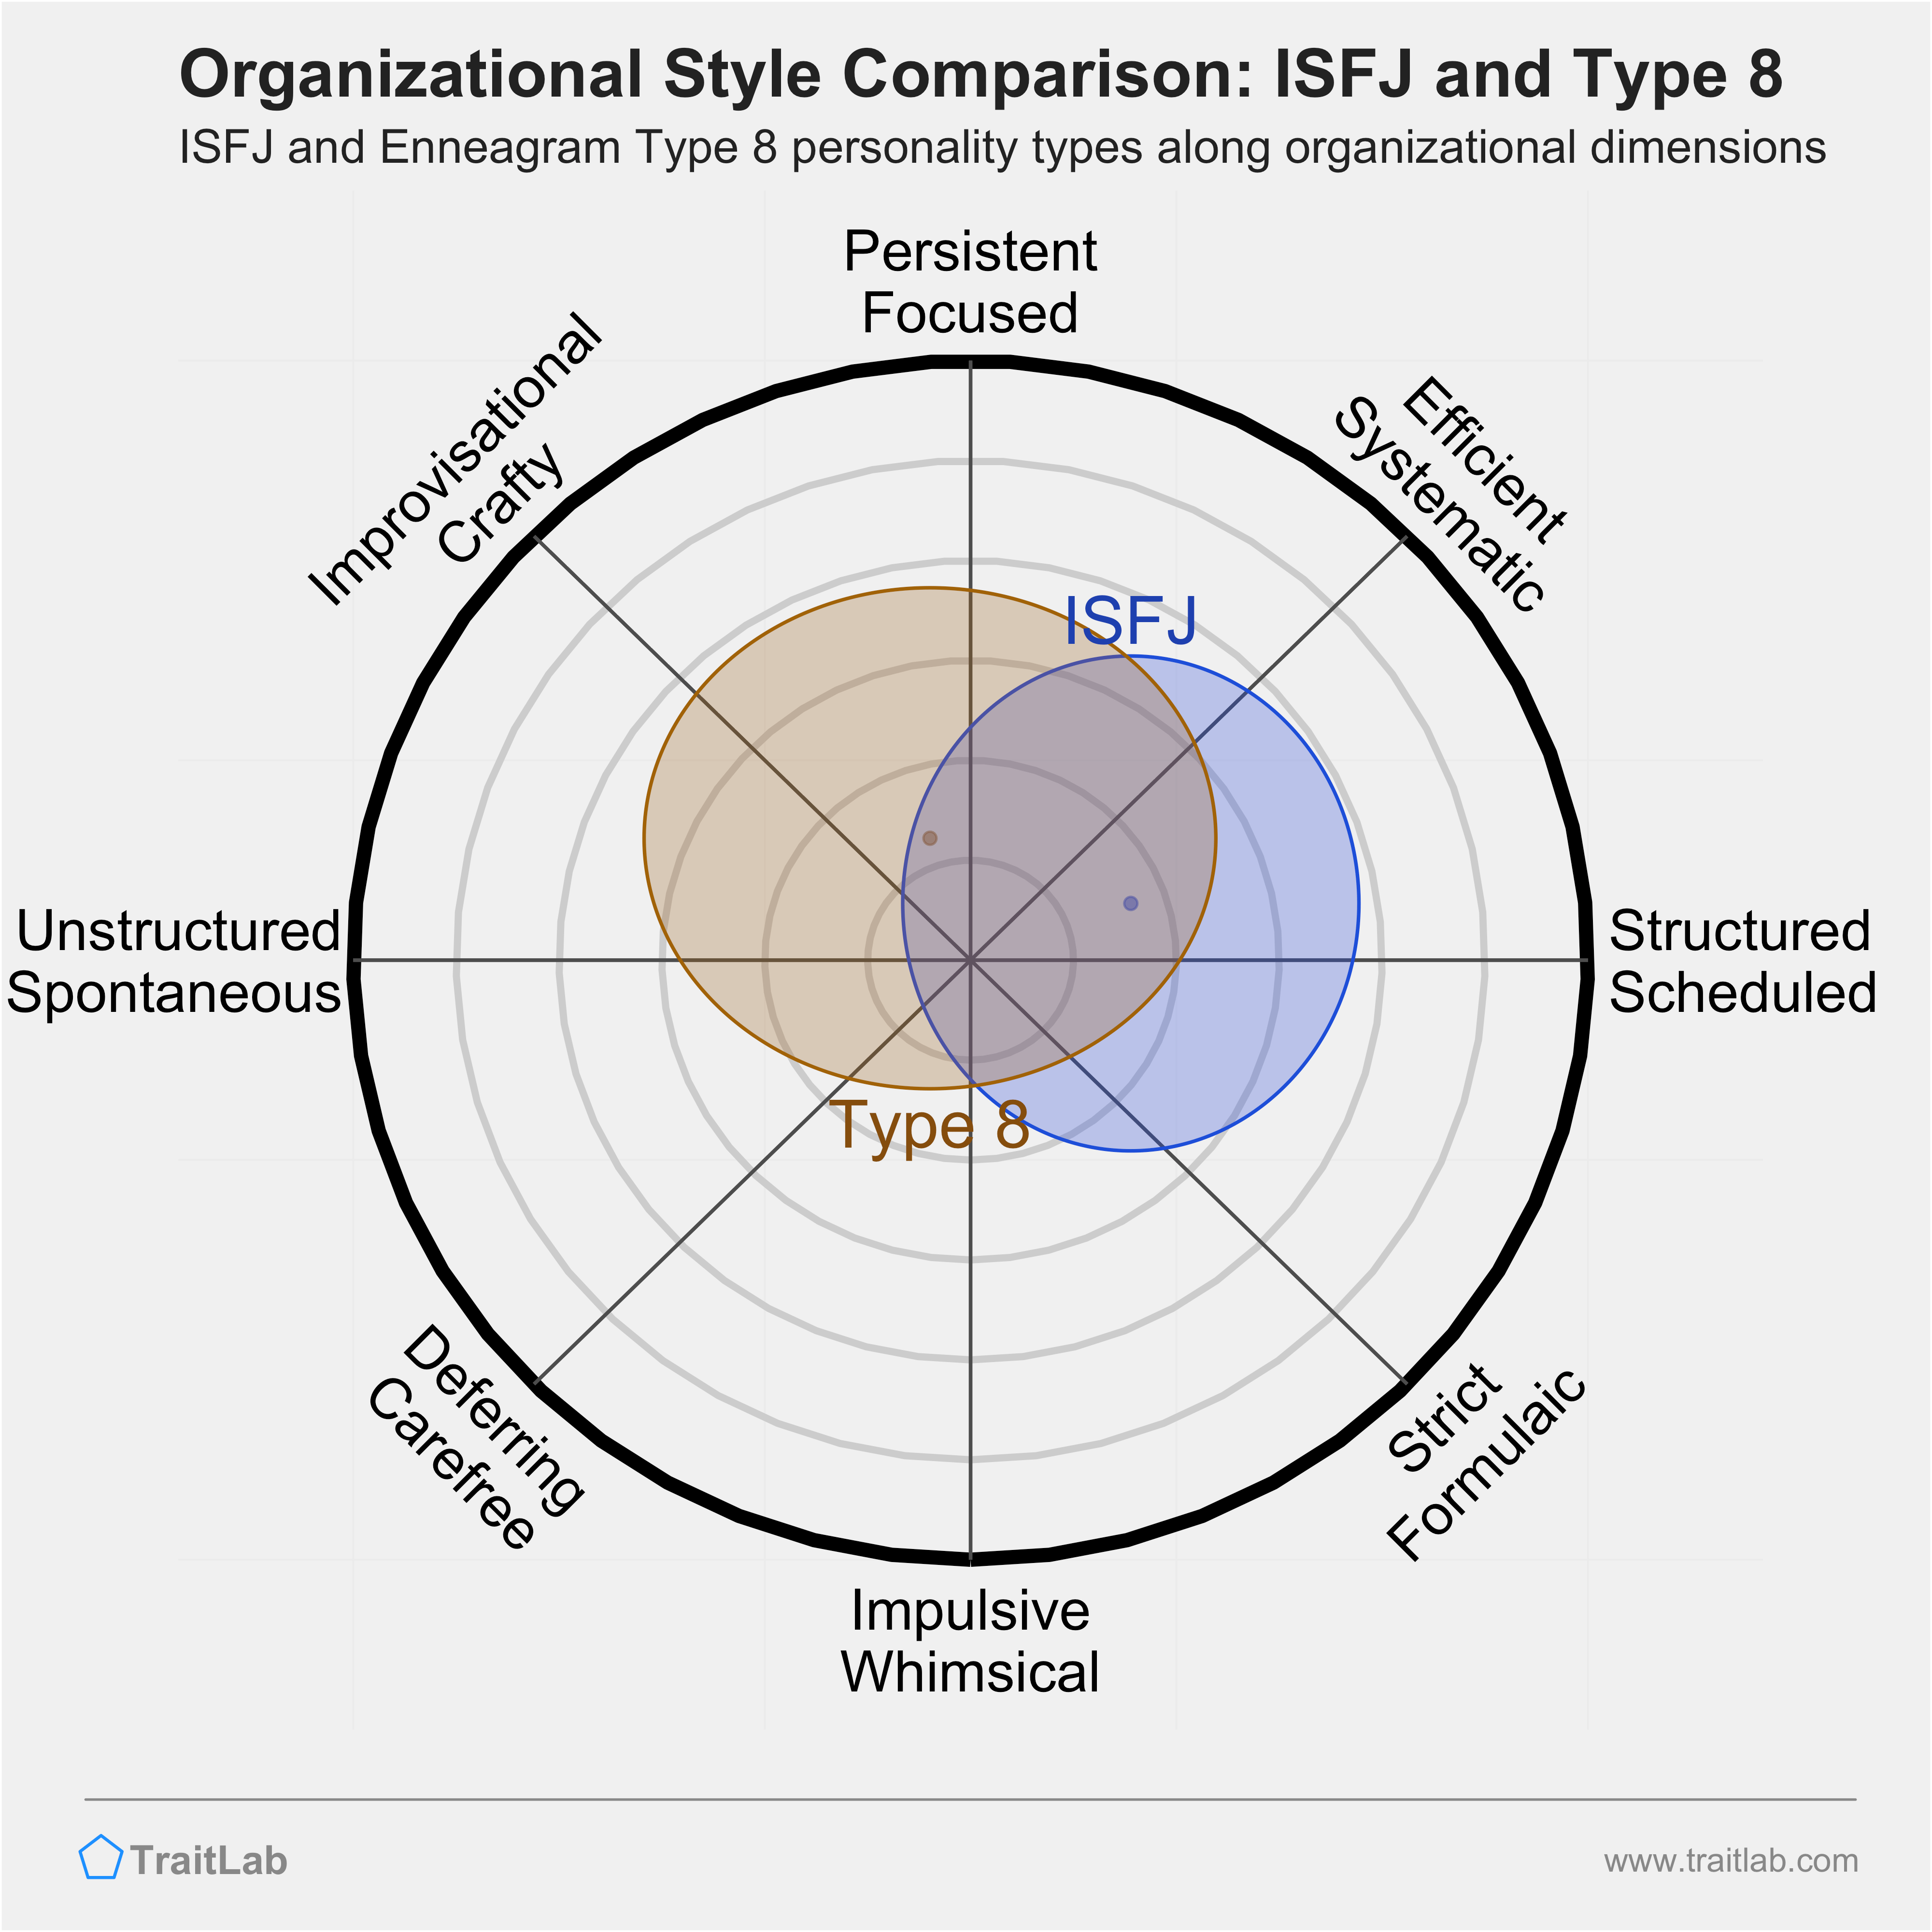 ISFJ and Type 8 comparison across organizational dimensions